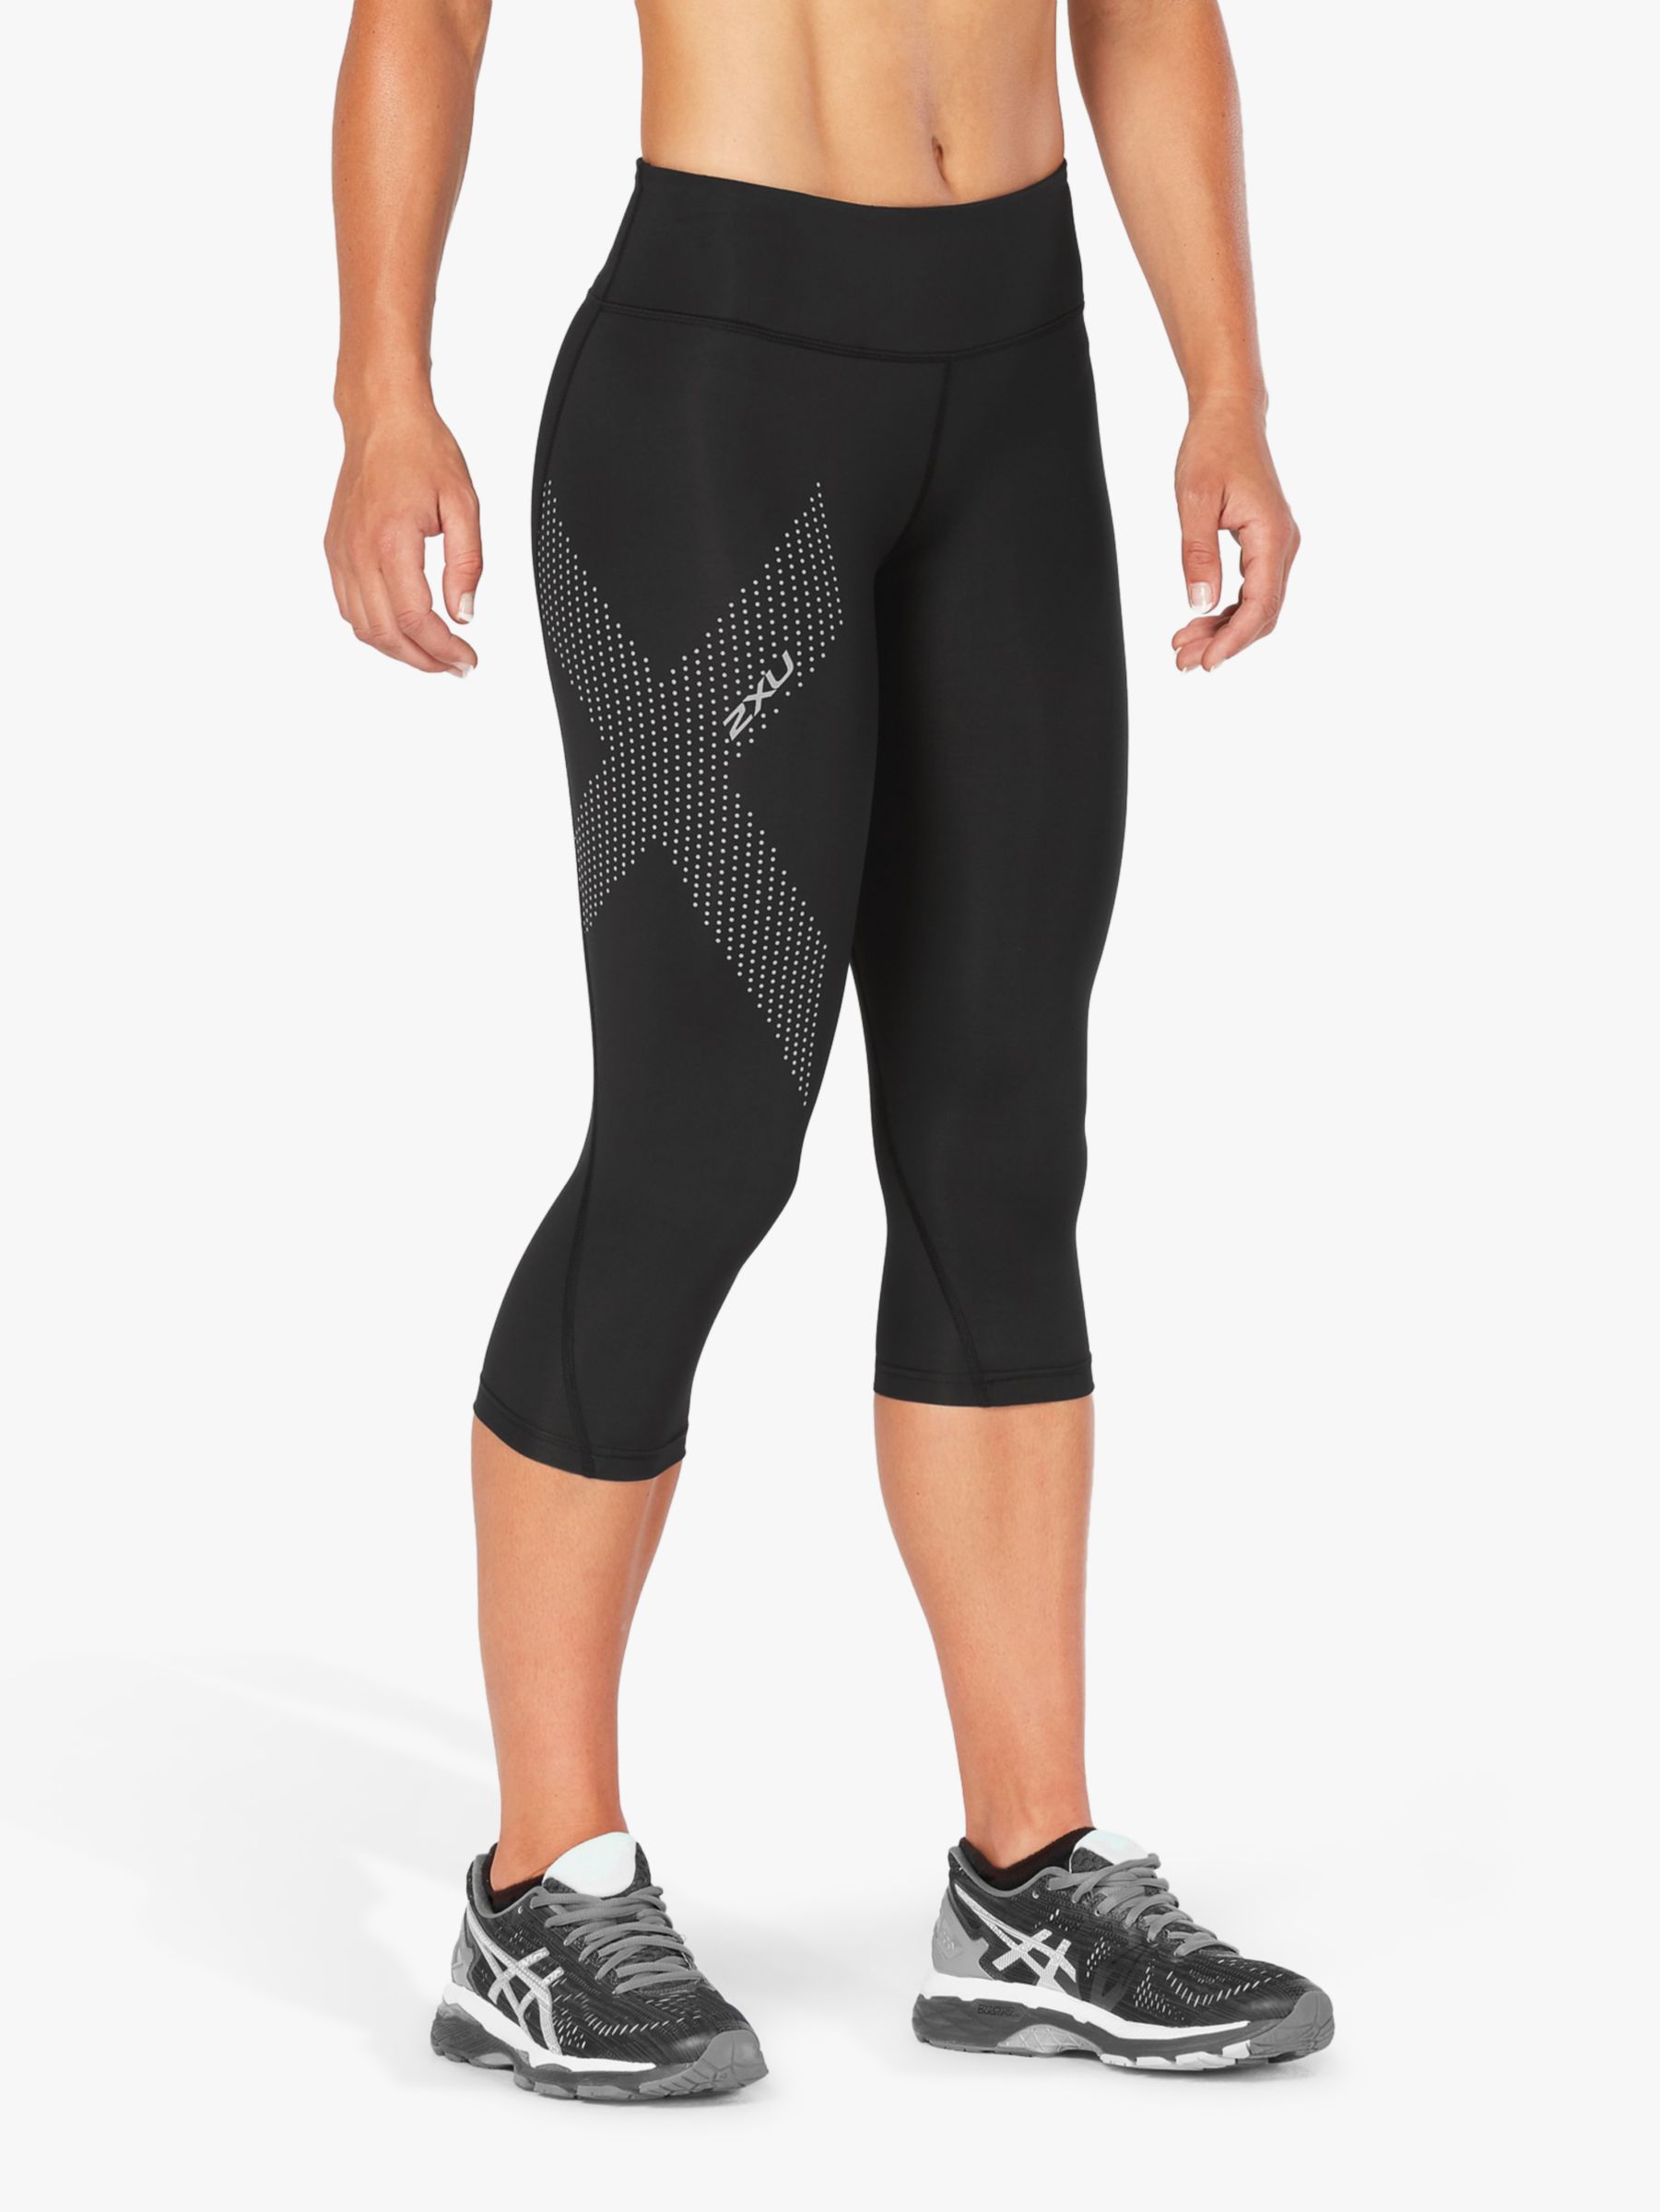 Compression Pants for Running: What Every Runner Should Know